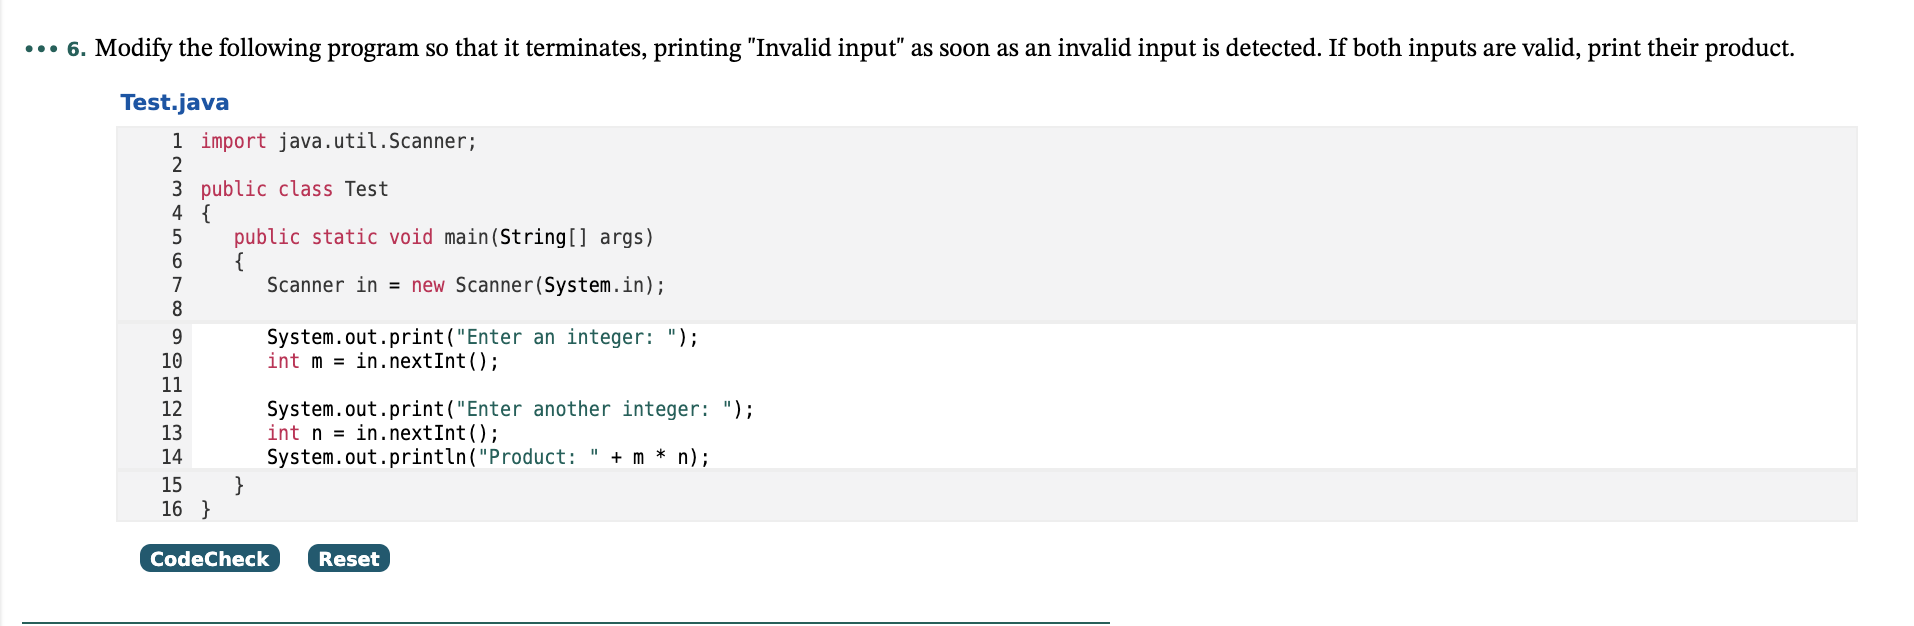 . Modify the following program so that it terminates, printing "Invalid input" as soon as an invalid input is detected. If both inputs are valid, print their product.
Test.java
1 import java.util.Scanner;
2
3 public class Test
4 {
public static void main(String[] args)
{
Scanner in = new Scanner(System.in);
6
7
8
9.
10
System.out.print("Enter an integer: ");
int m = in.nextInt();
11
12
13
System.out.print("Enter another integer: ");
int n = in.nextInt();
System.out.println("Product: " + m * n);
}
14
15
16 }
CodeCheck
Reset
